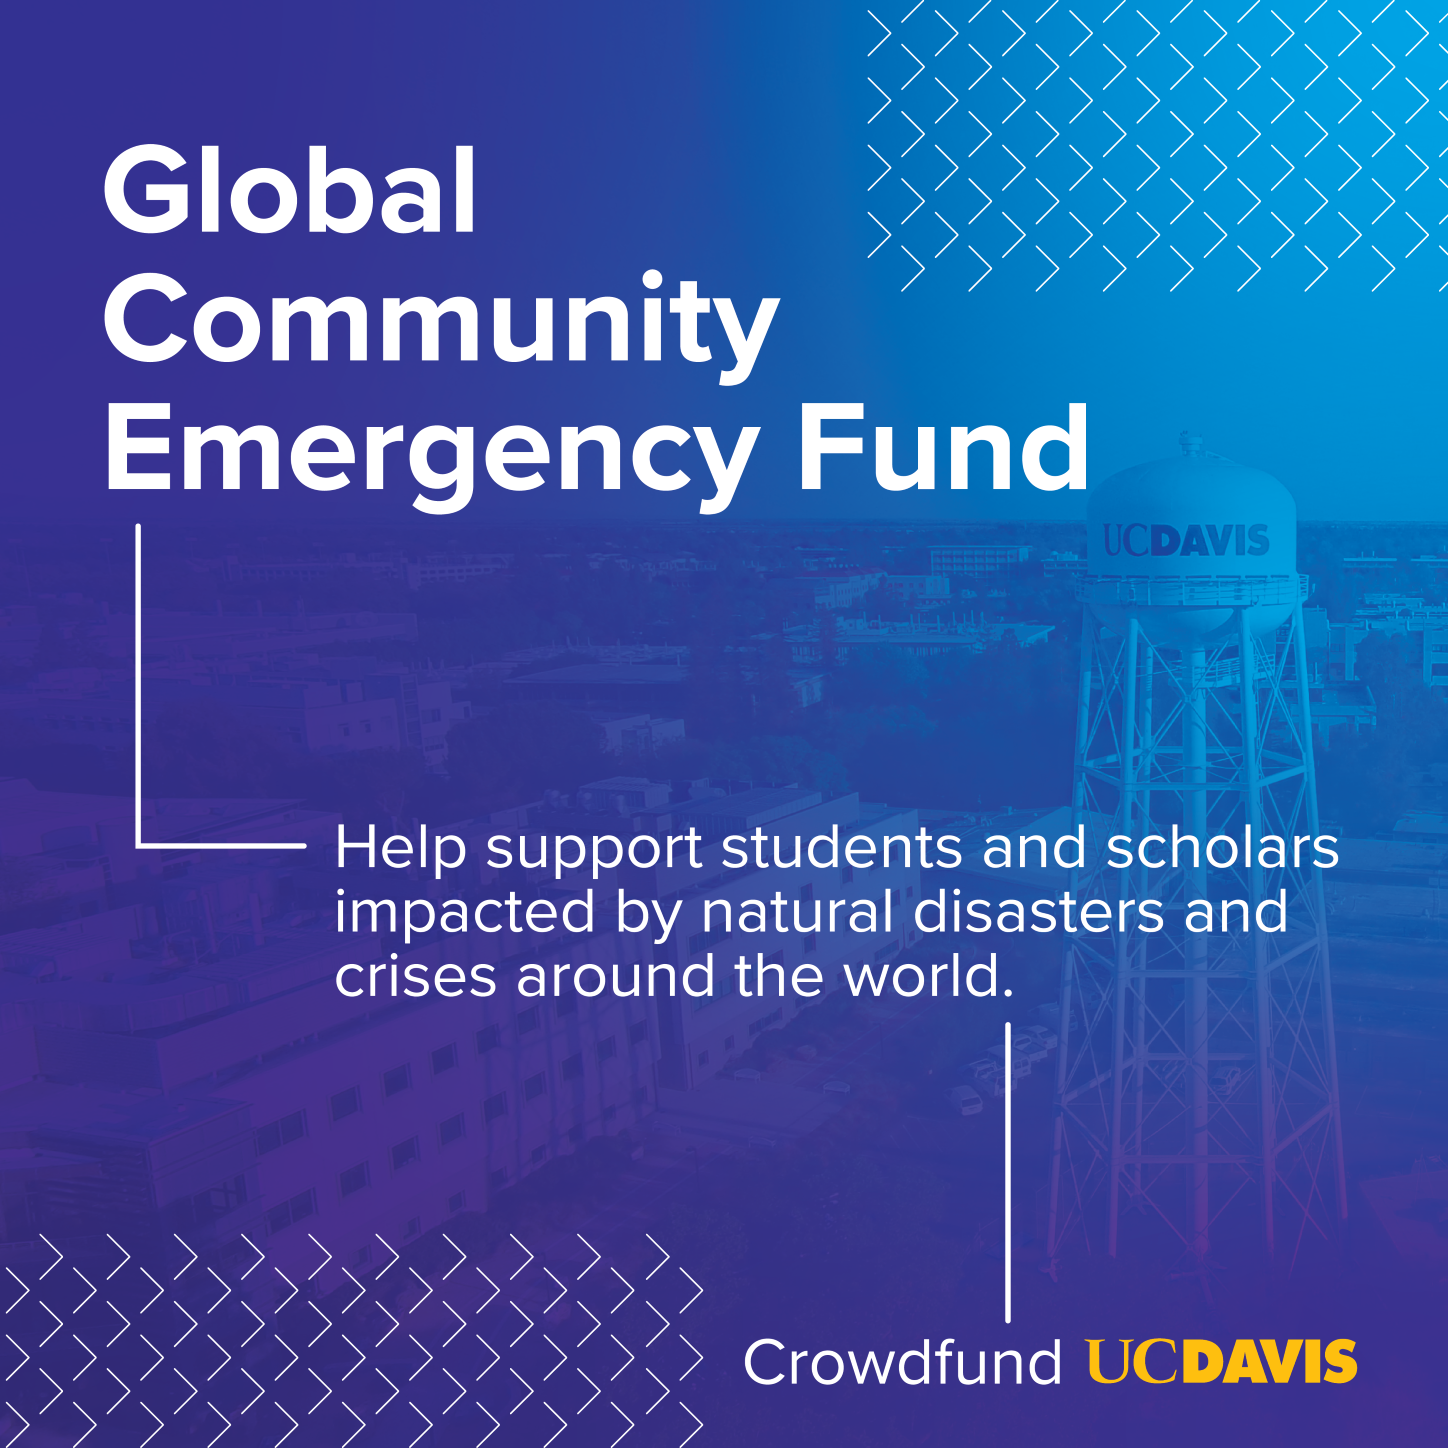 Photo composite of Global Community Emergency Fund